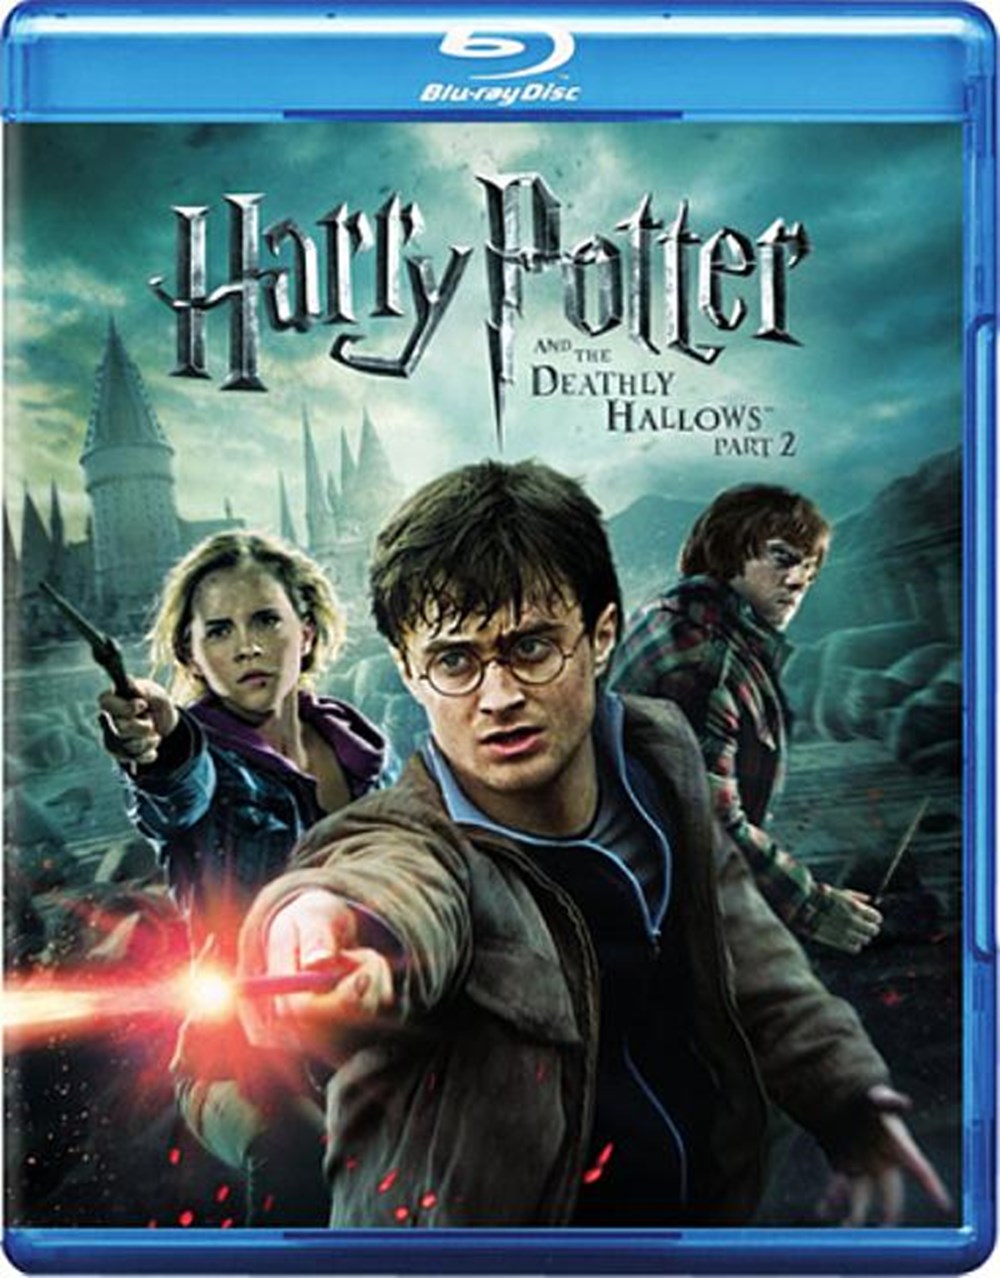 Harry Potter and the Deathly Hallows Part 2 (DVD & Digital Copy Included)